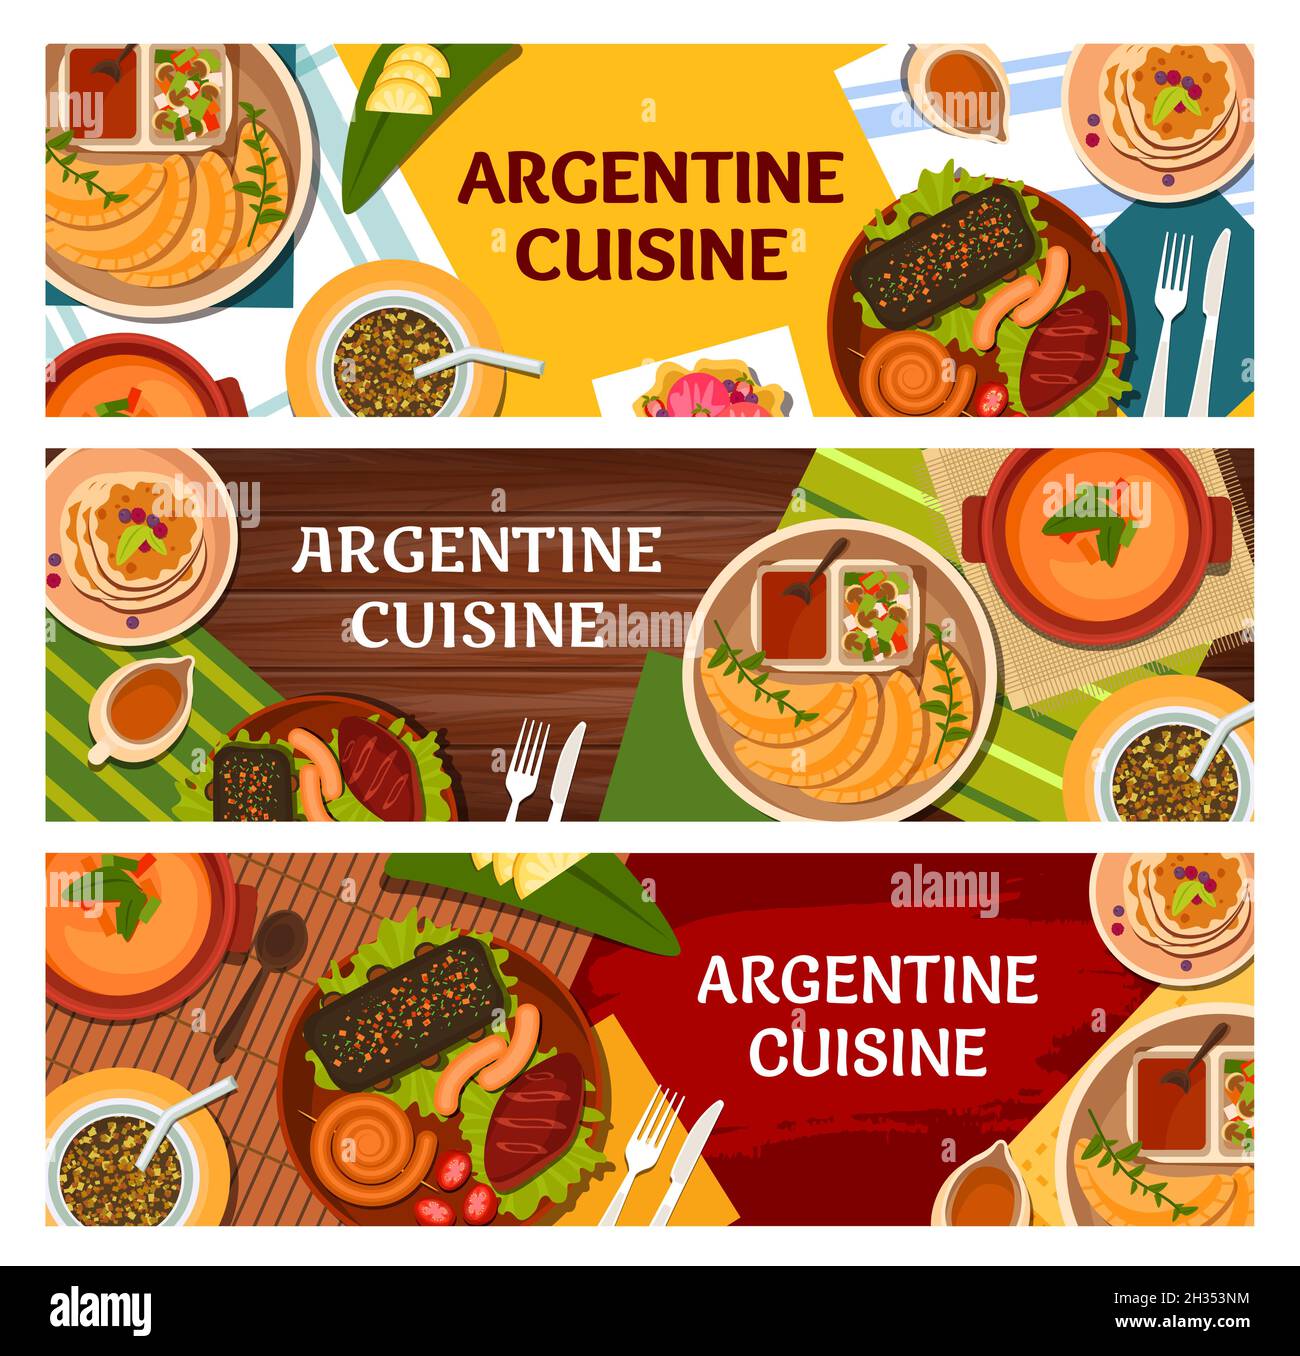 Argentine cuisine vector banners of meat dishes with vegetable meal and desserts. Barbecue pork and chorizo sausages asado, empanada pies and chimichu Stock Vector